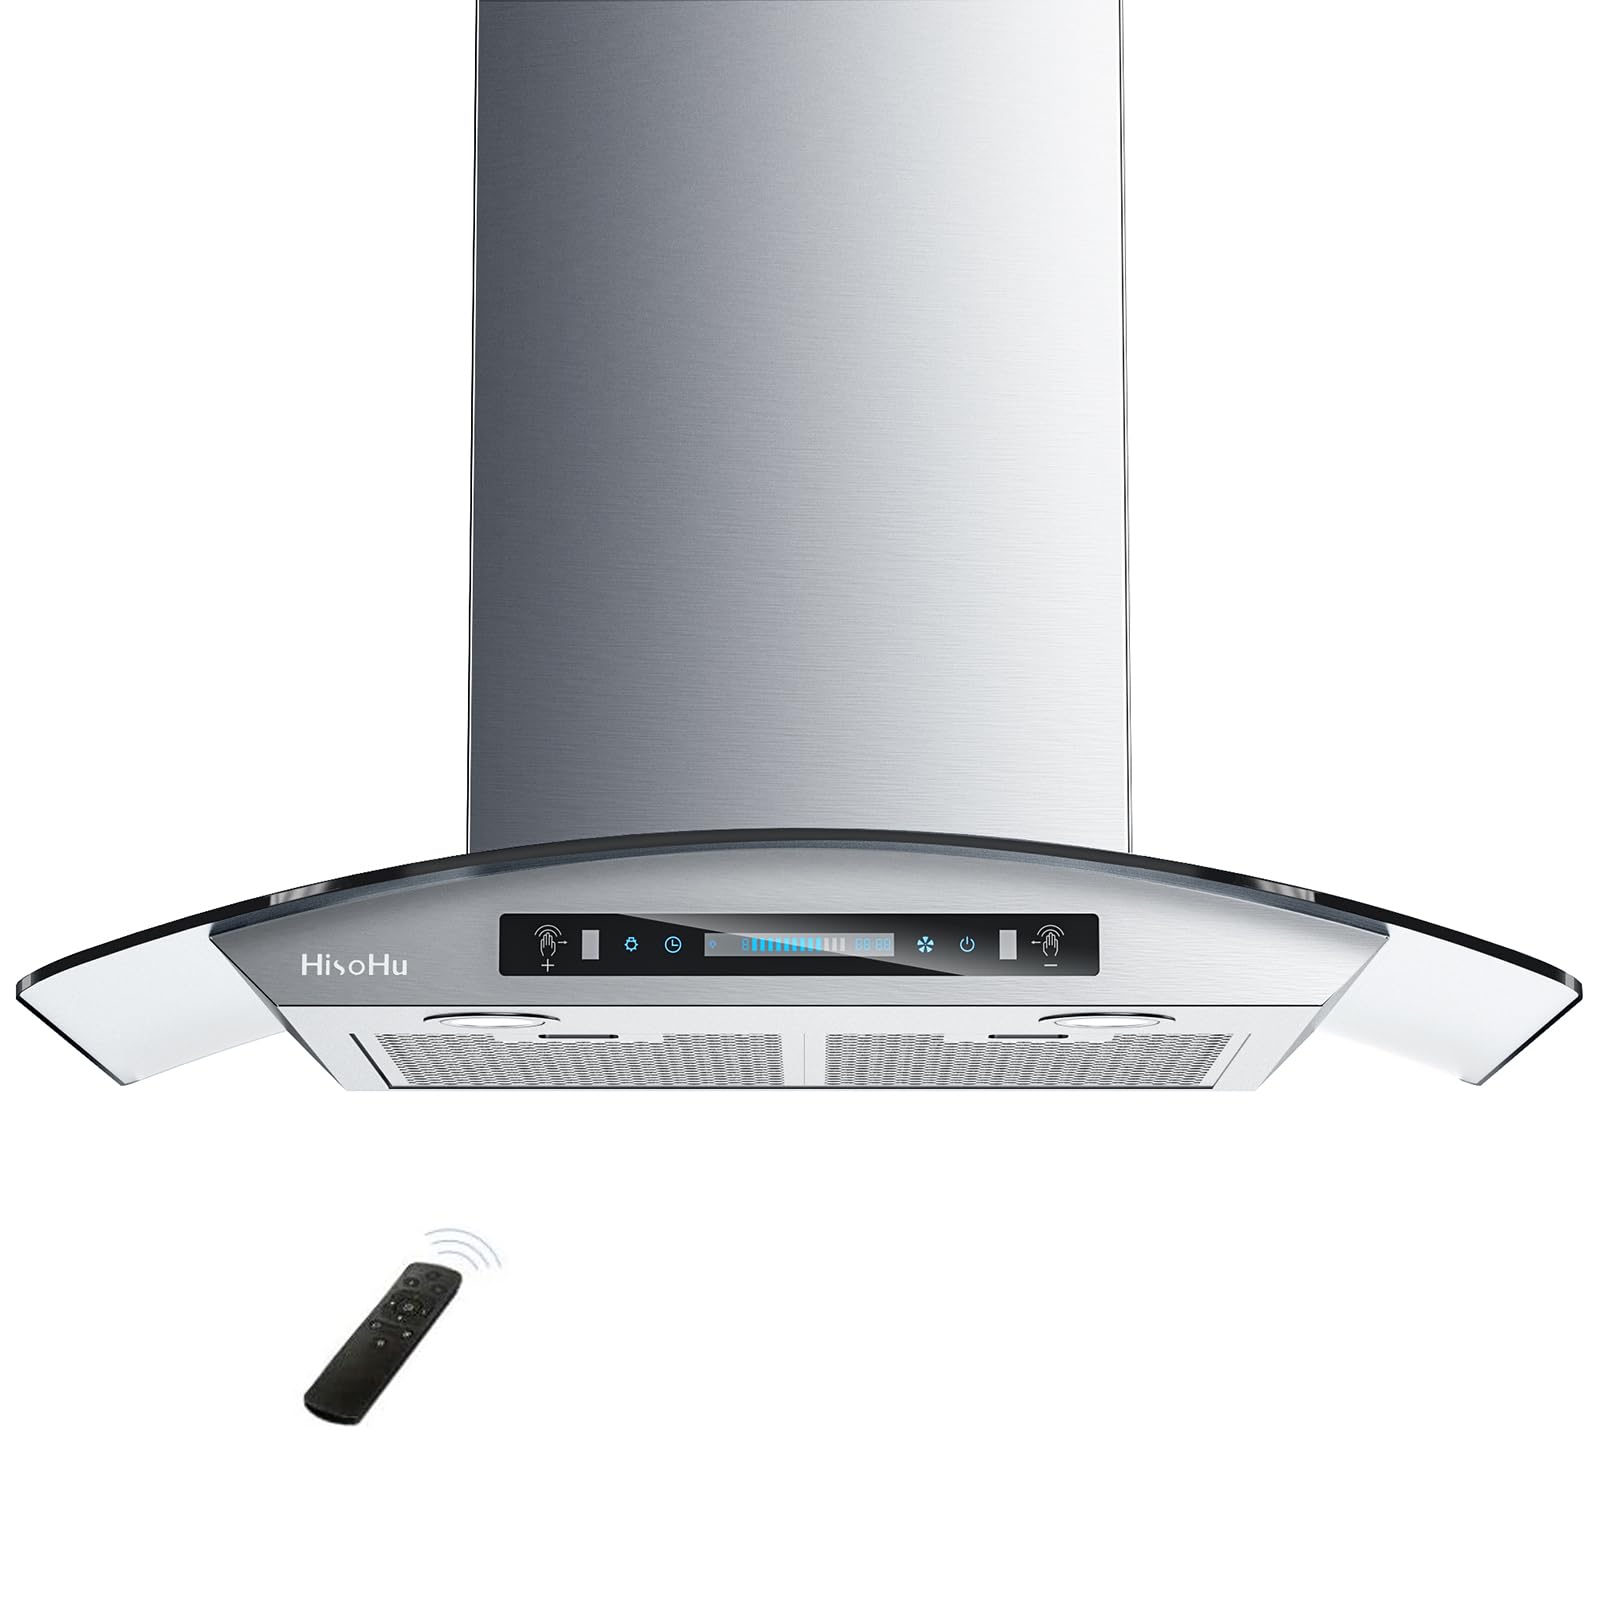 HisoHu Wall Mount Curved Glass Range Hood 30 Inch, 780 CFM Kitchen Vent Hood Ductless/Ducted Convertible with Touchscreen and LED Lights, Stainless Steel